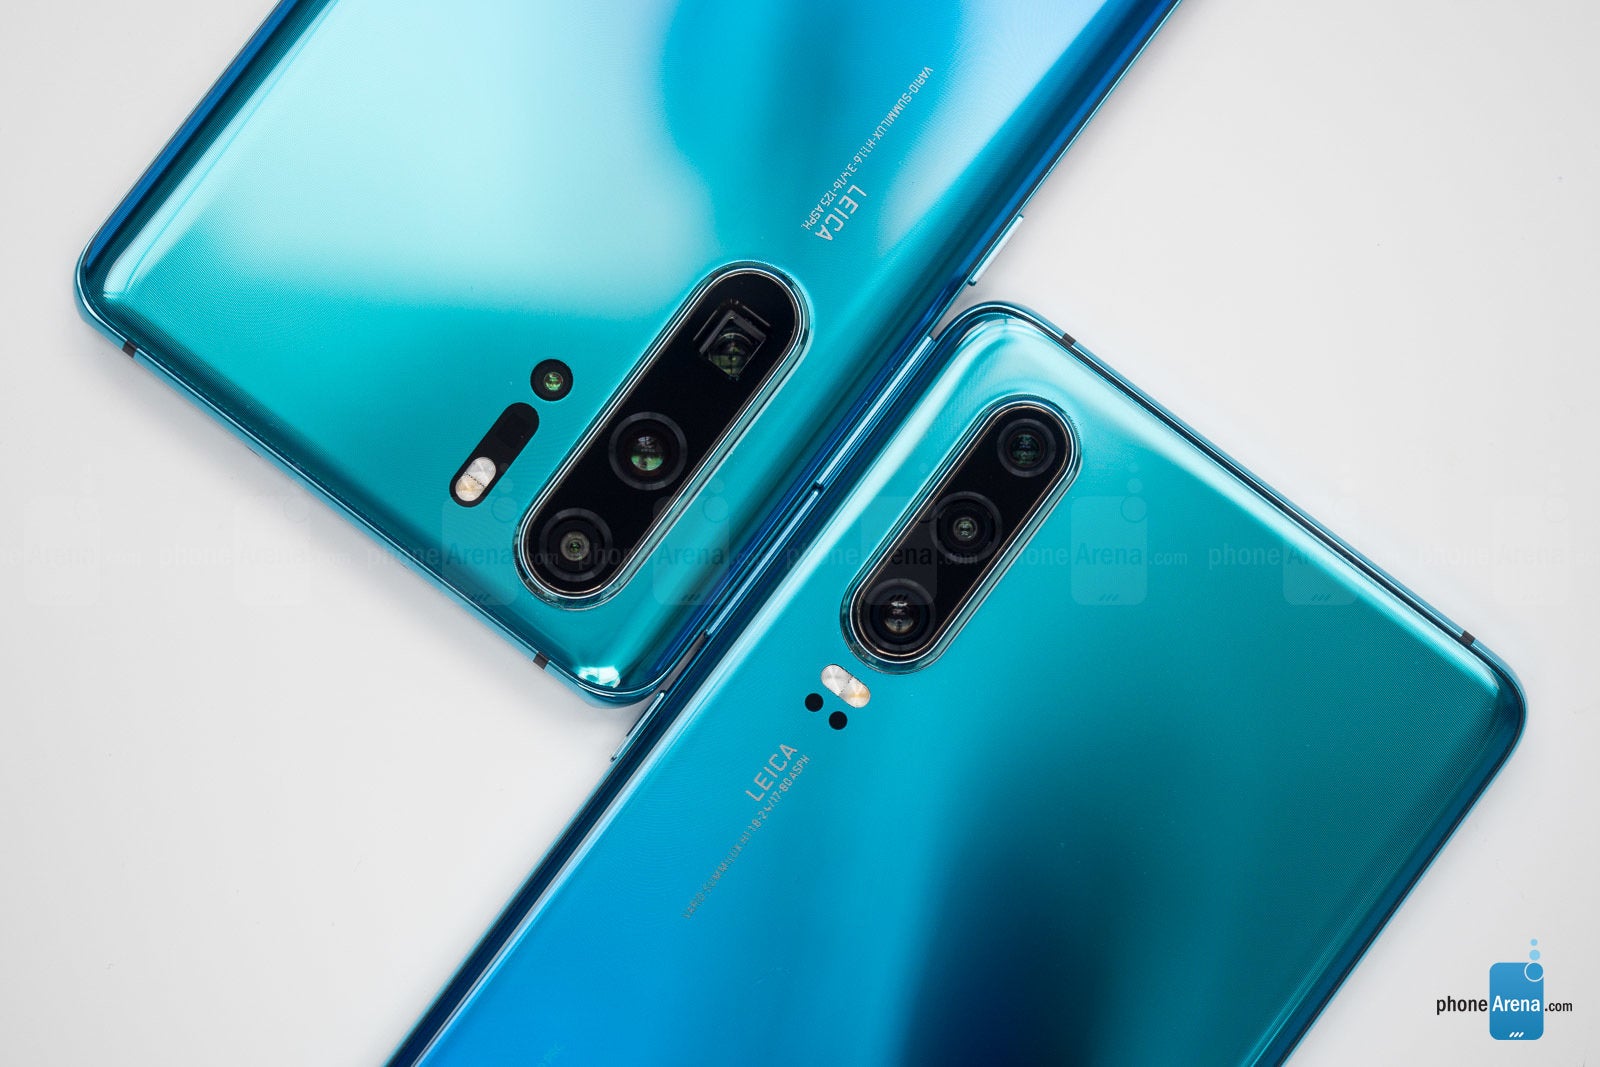 Huawei's latest blow could signal the end of its smartphone business